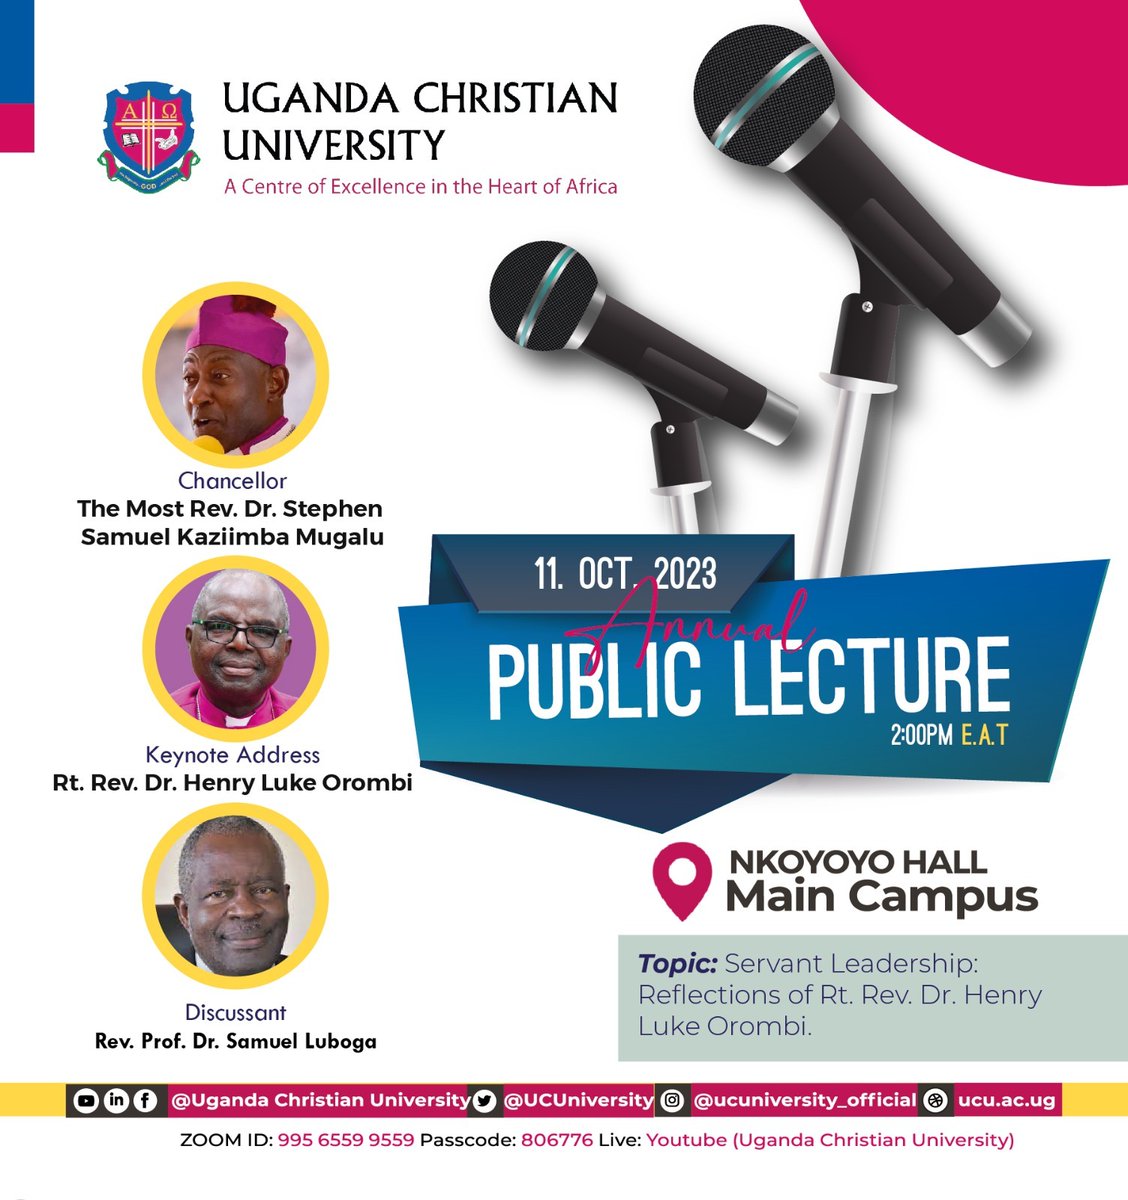 The @Archbp_COU of @ChurchofUganda_& Chancellor 
of @UCUniversity invites you to the annual #PublicLecture.

Keynote address: The Rt. Rev. Henry Luke Orombi. 
The Discussant: Rev. Prof. Dr. Samuel Luboga

Meeting ID: 995 6559 9559
Passcode: 806776
#UCUPublicLecture23
#UCUGrad23